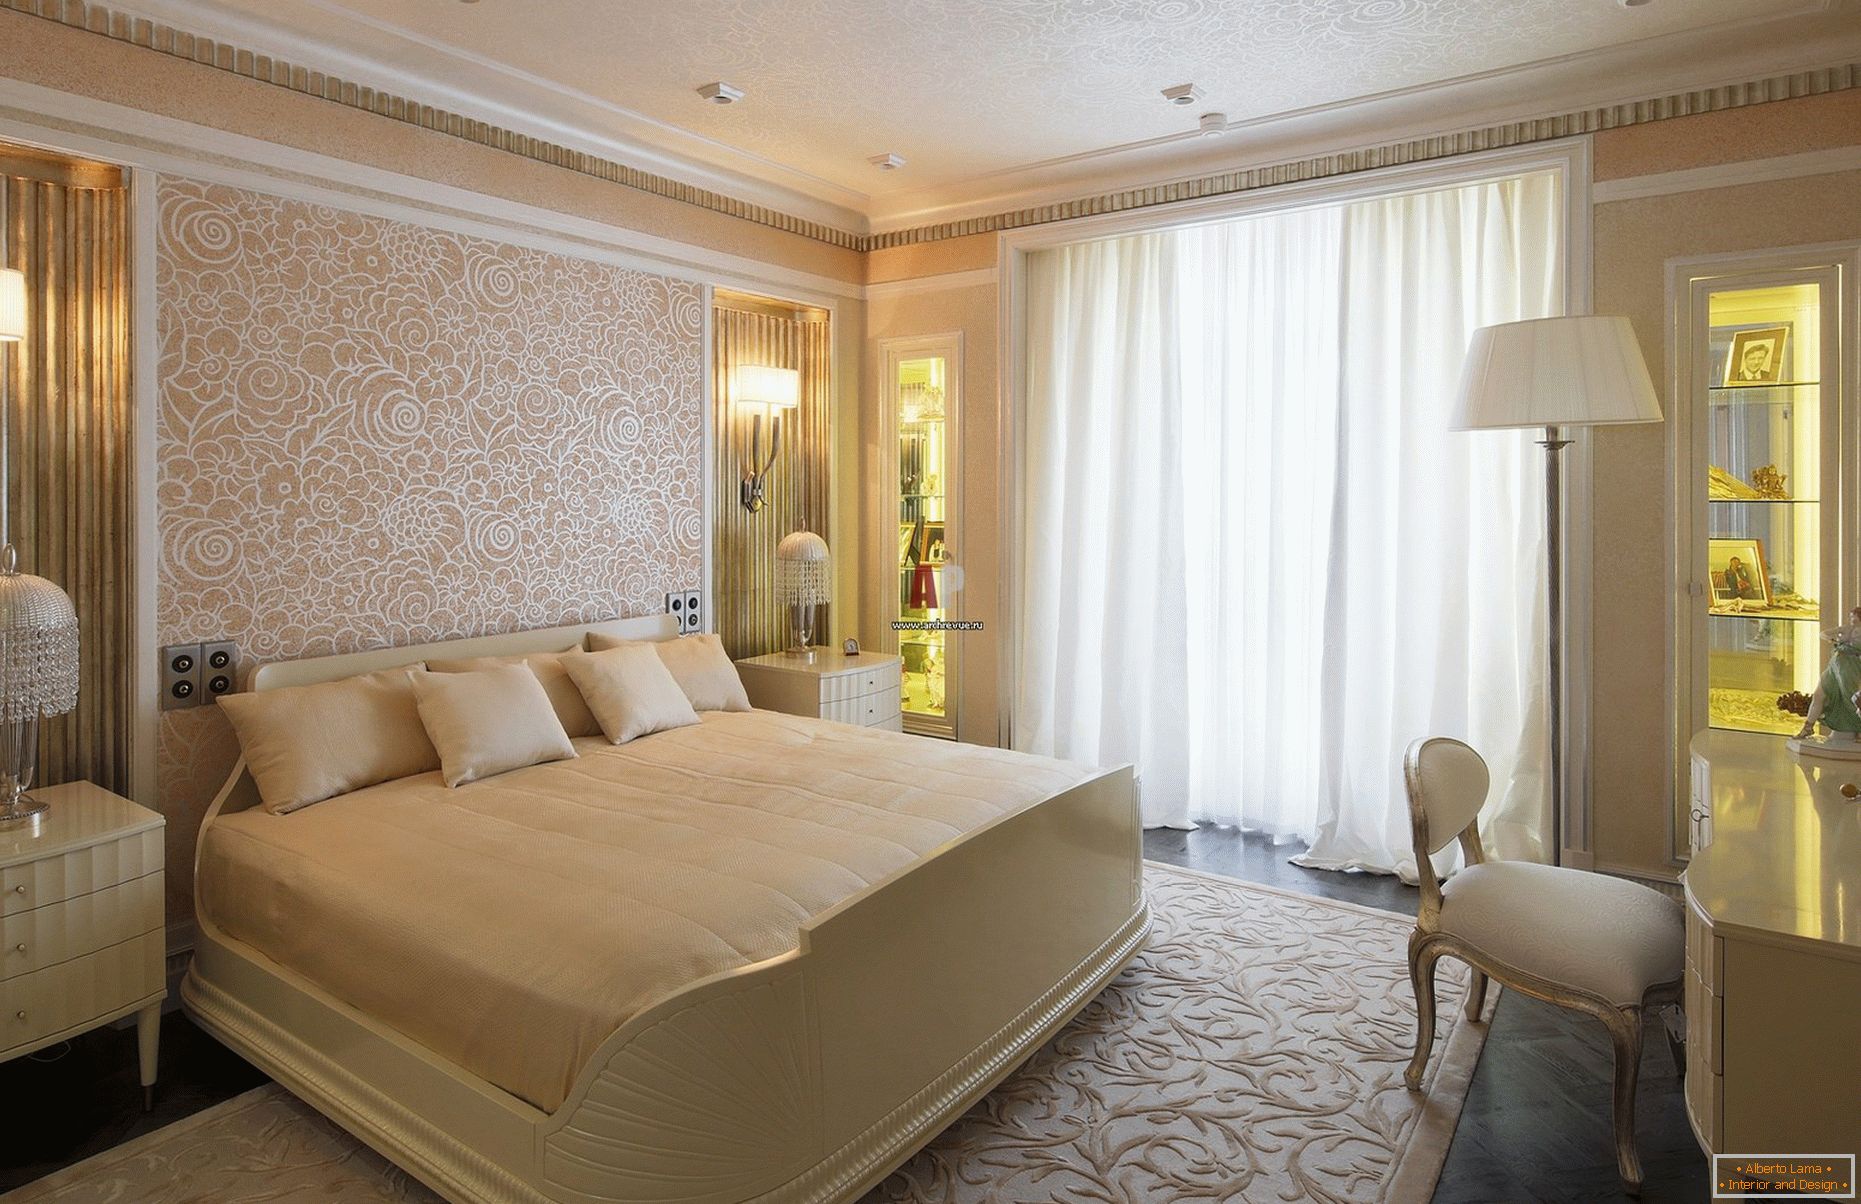 Peach and gold shades in the design of the bedroom